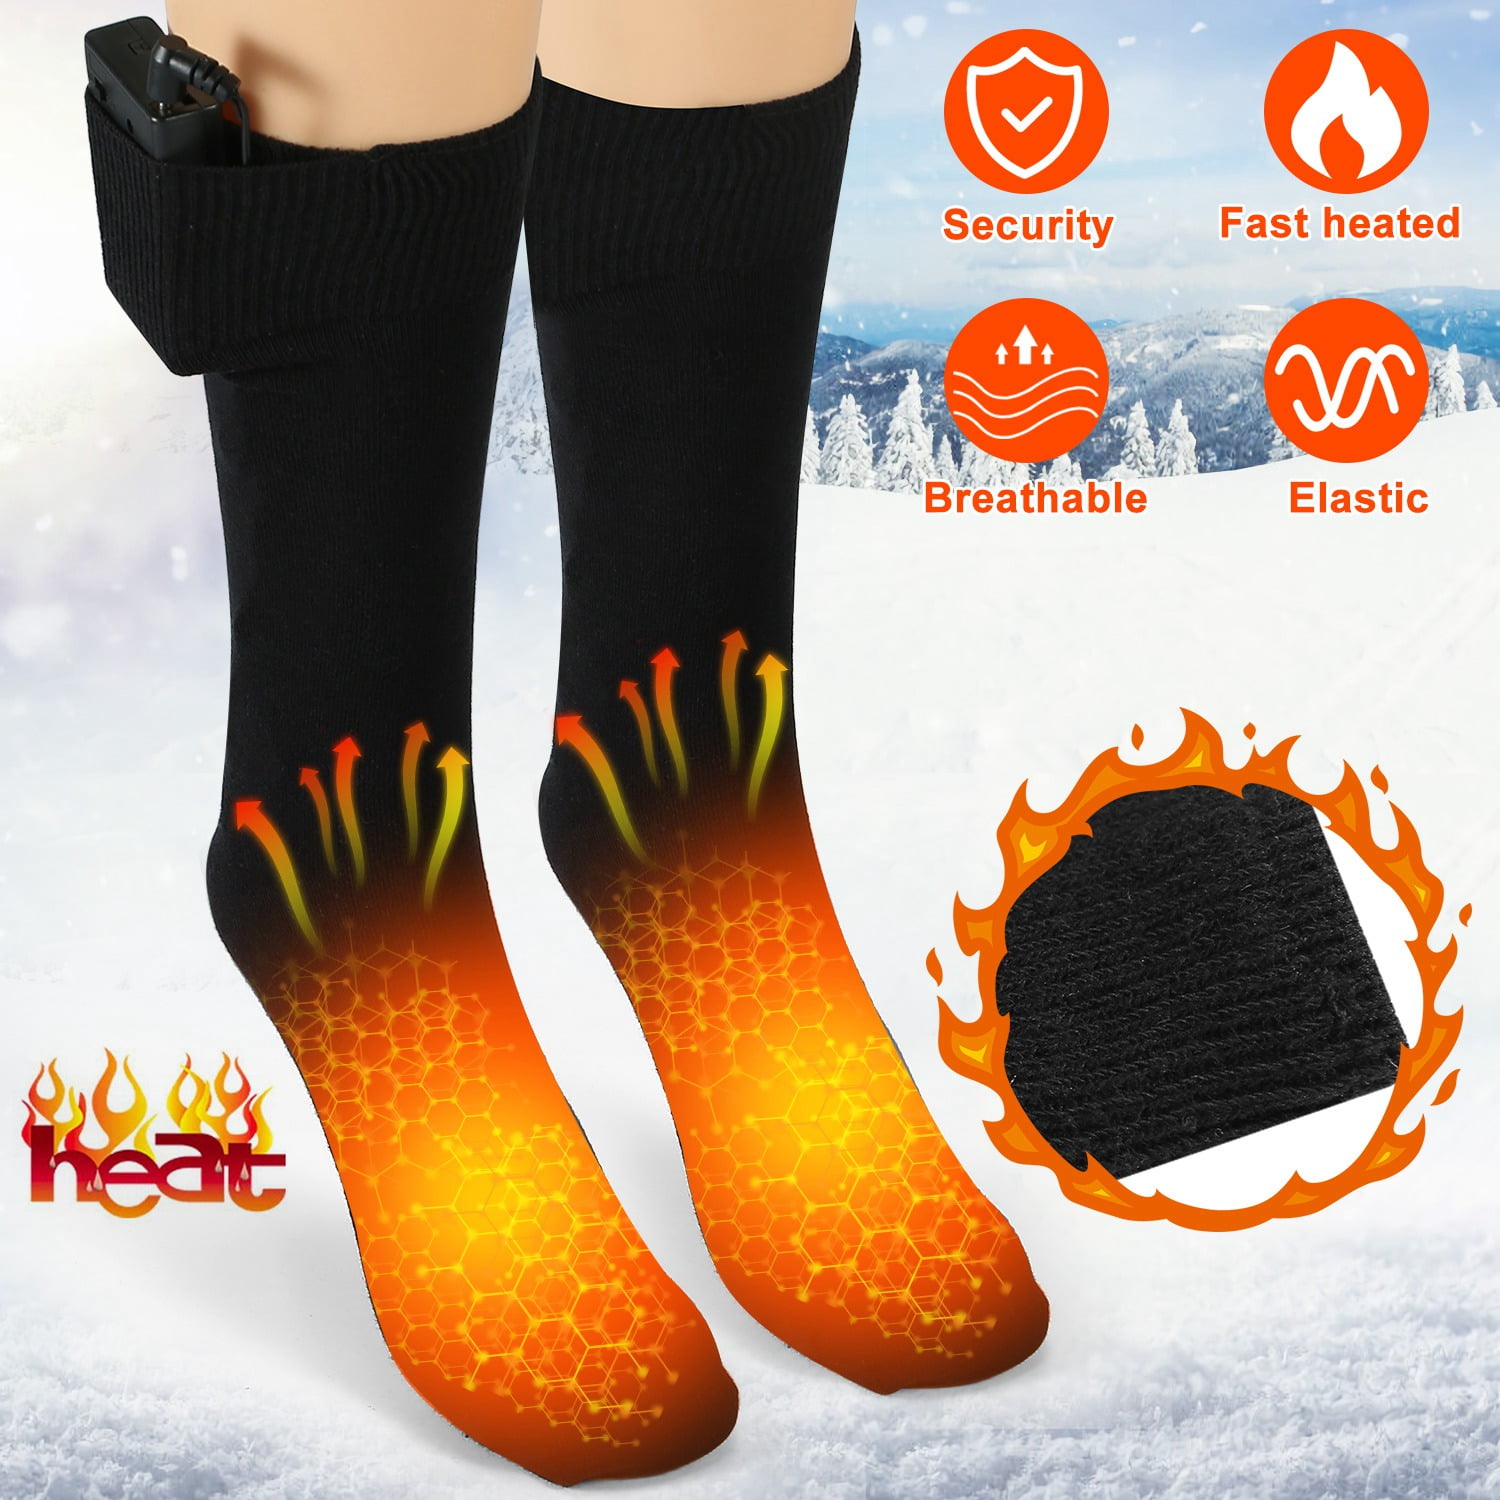 Electric Heated Socks Rechargeable Battery 3.7V Foot Winter Warm+4000mAh Battery 